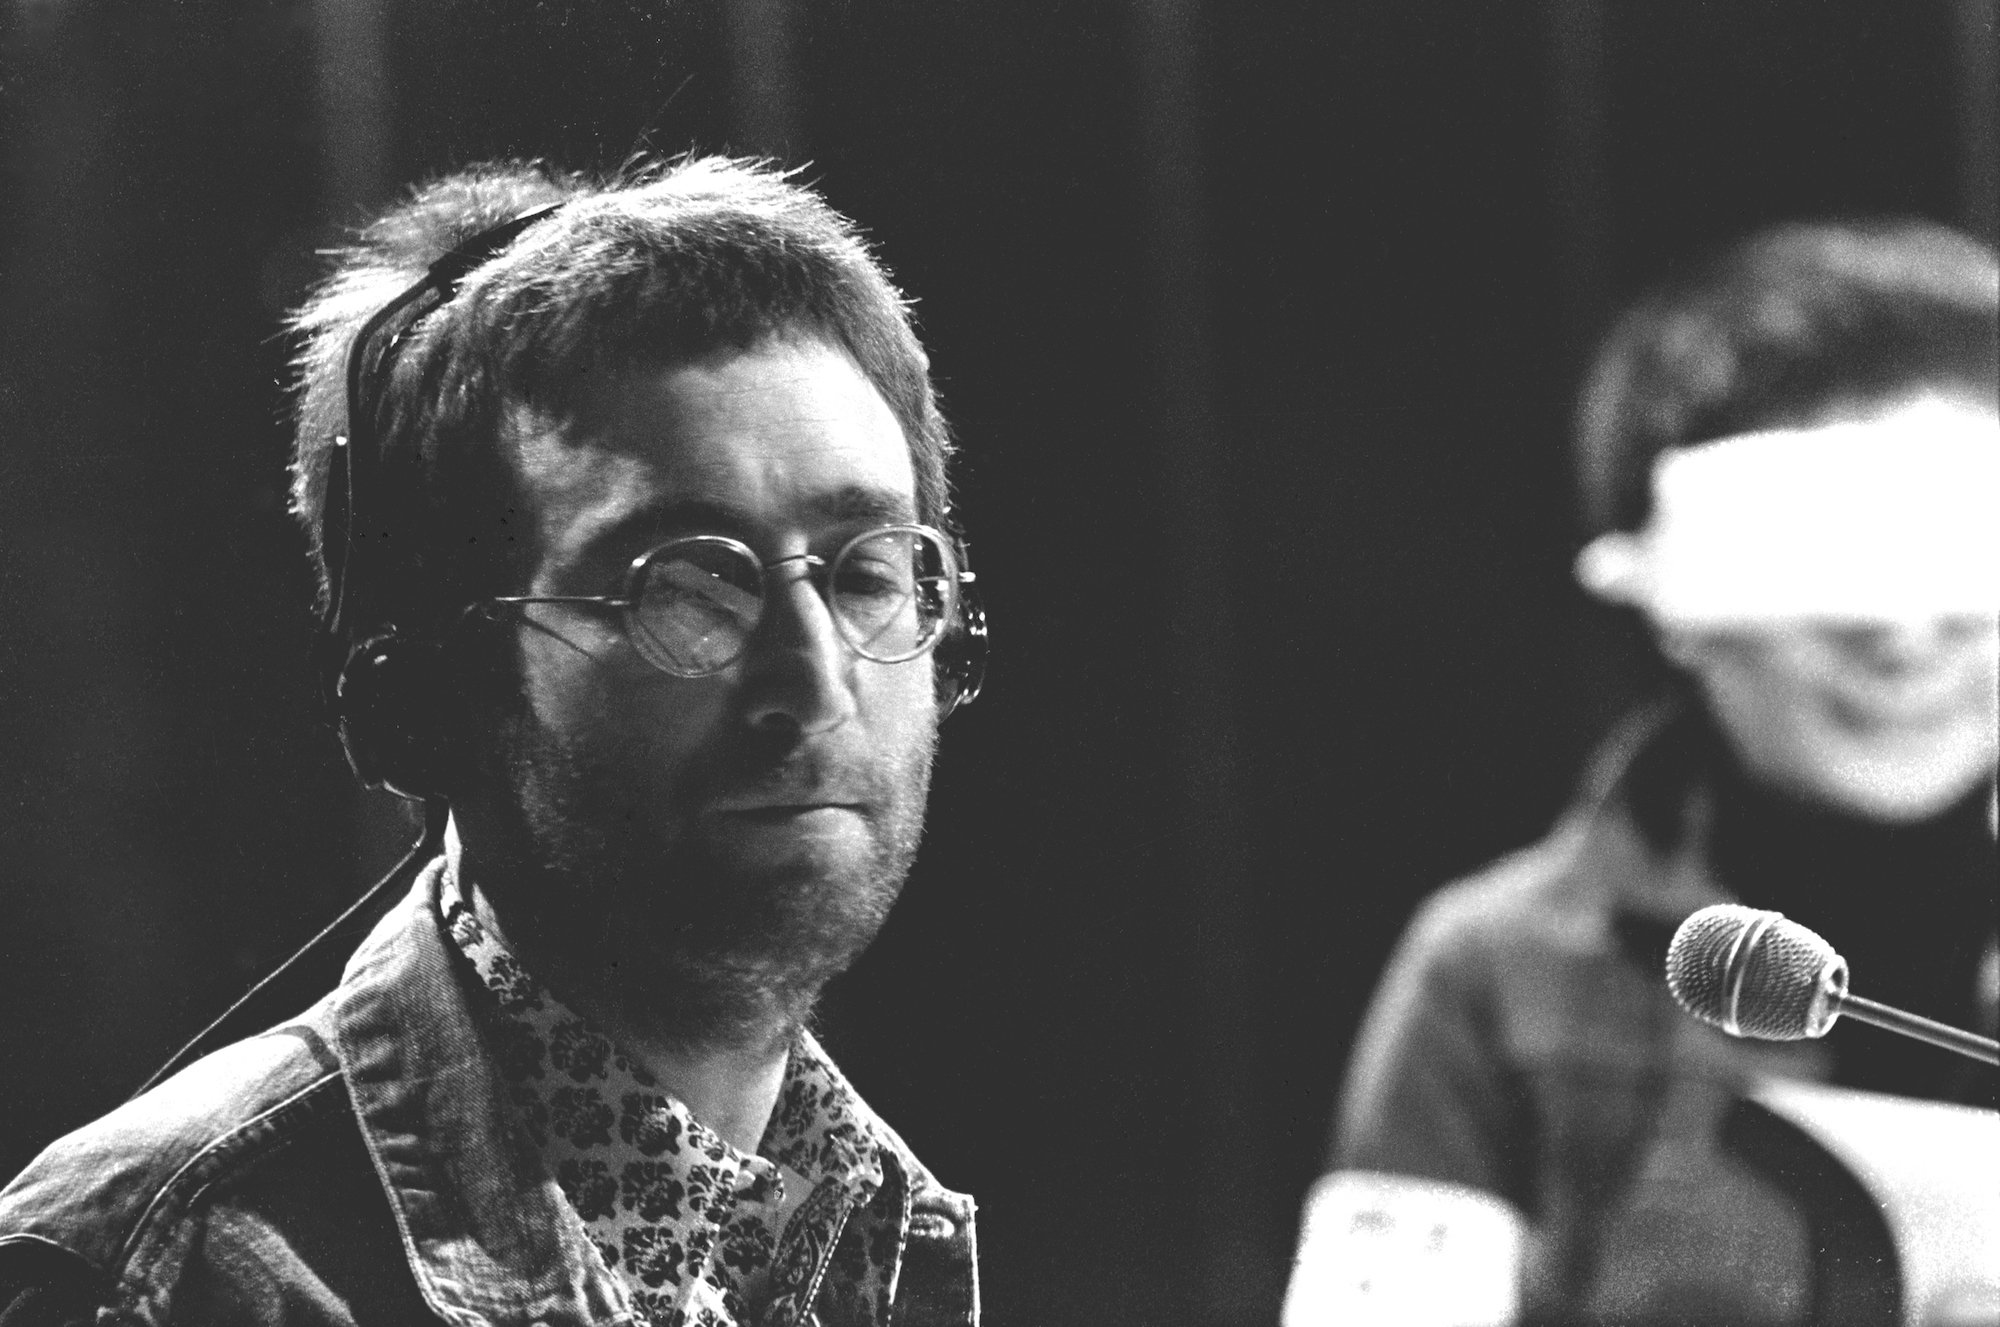 John Lennon records with the Plastic Ono Band in 1970